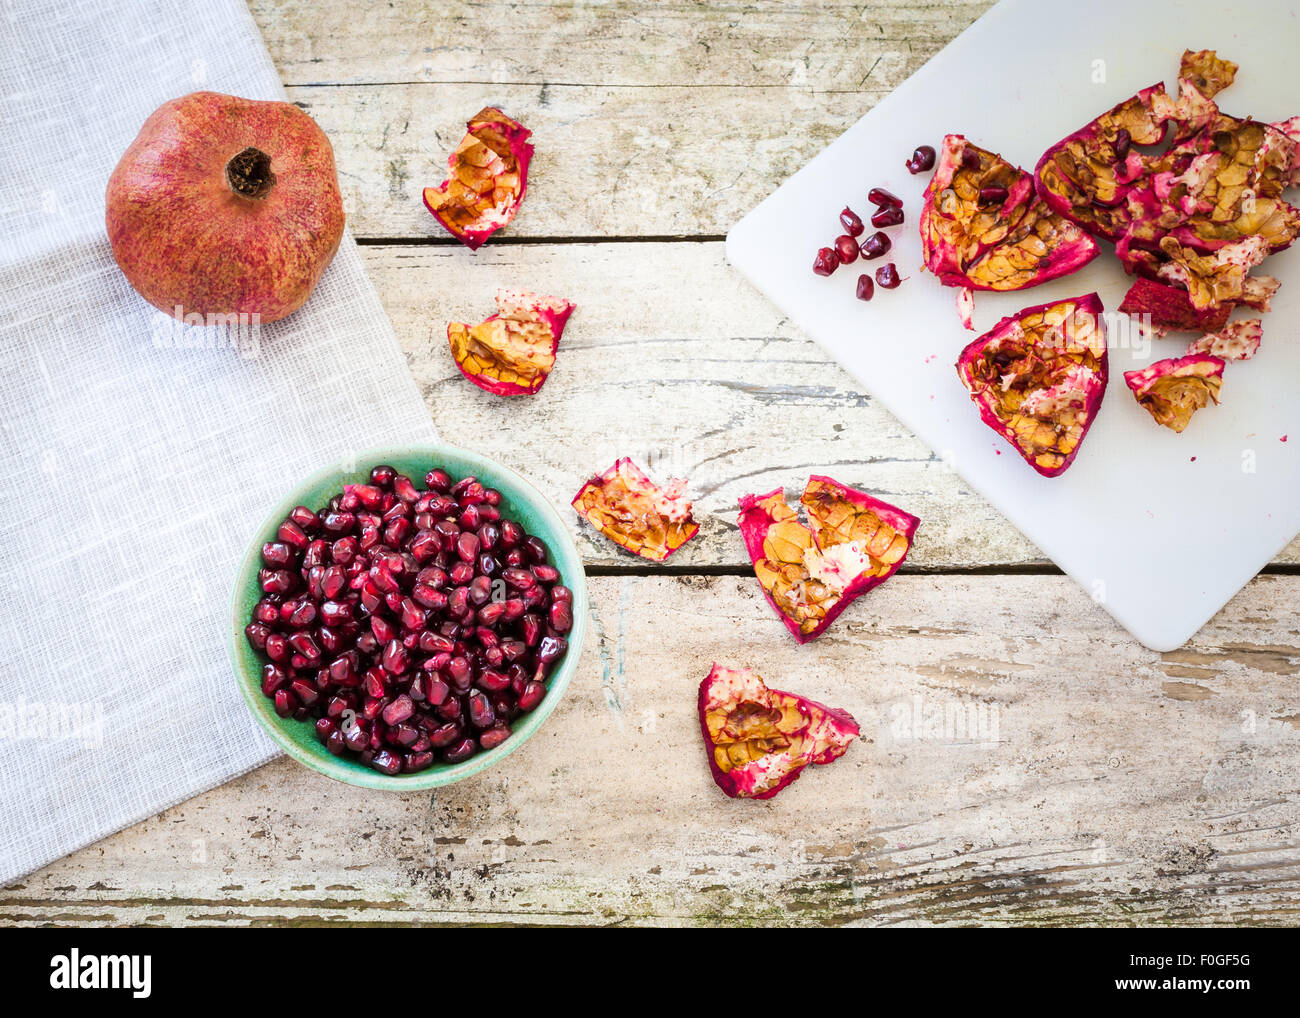 pomegranate fruit, peel and seeds on a rustic table Stock Photo